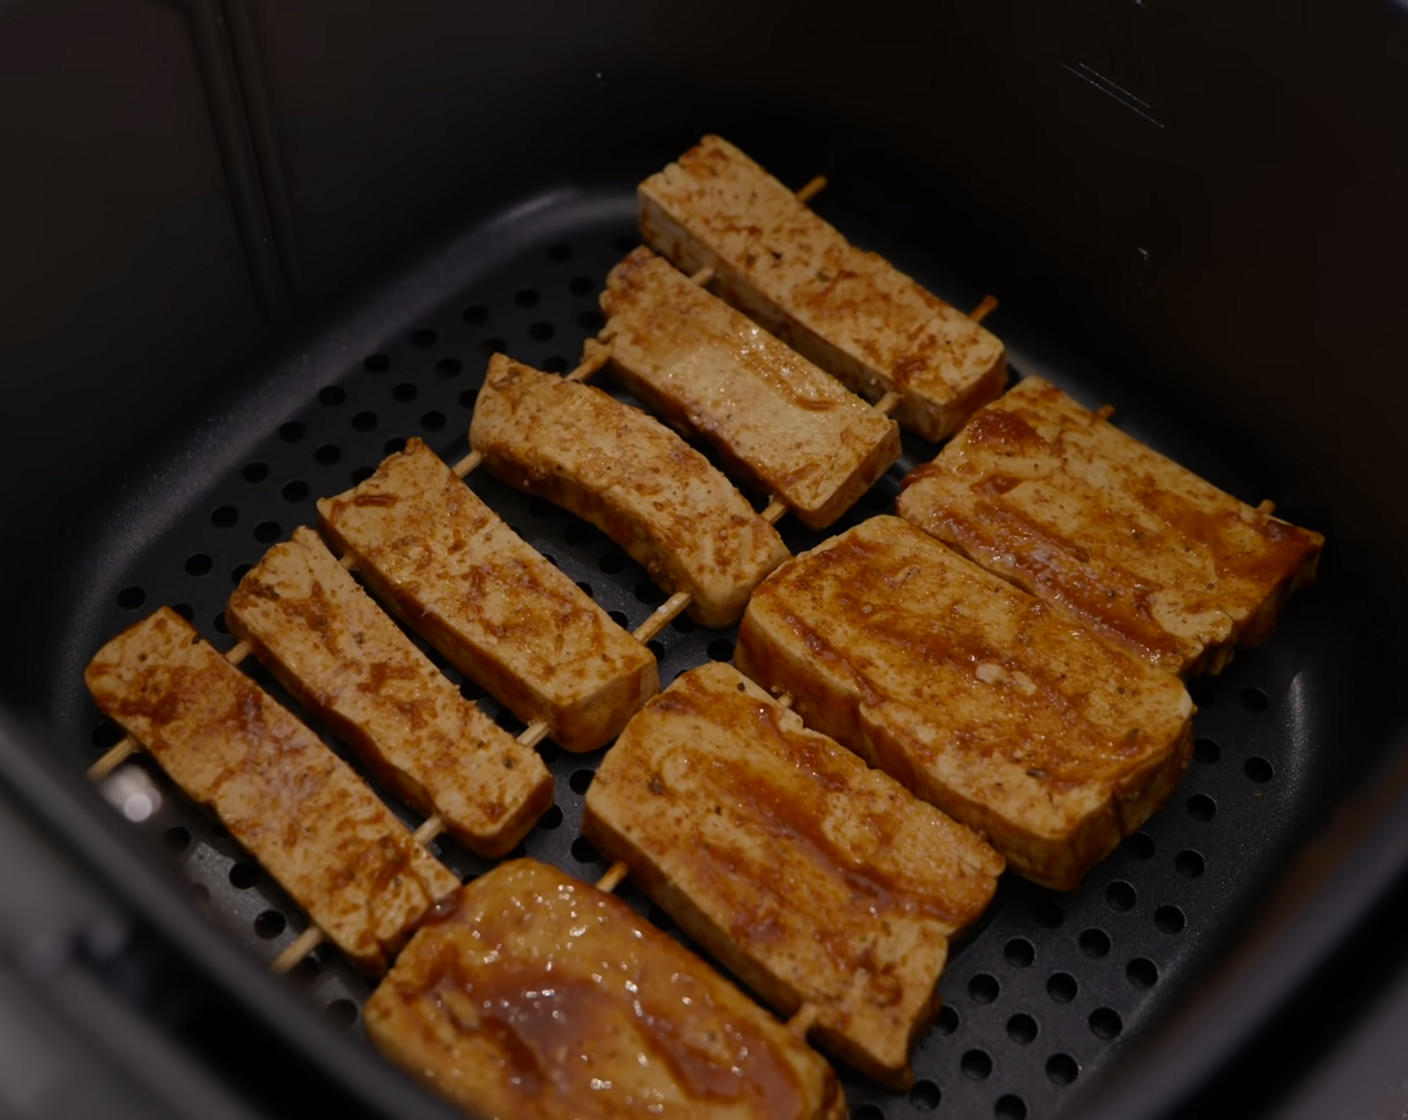 step 8 Add the racks of vegan ribs to your air fryer basket, set the air fryer to 375 degrees F (190 degrees C) for 5 minutes.